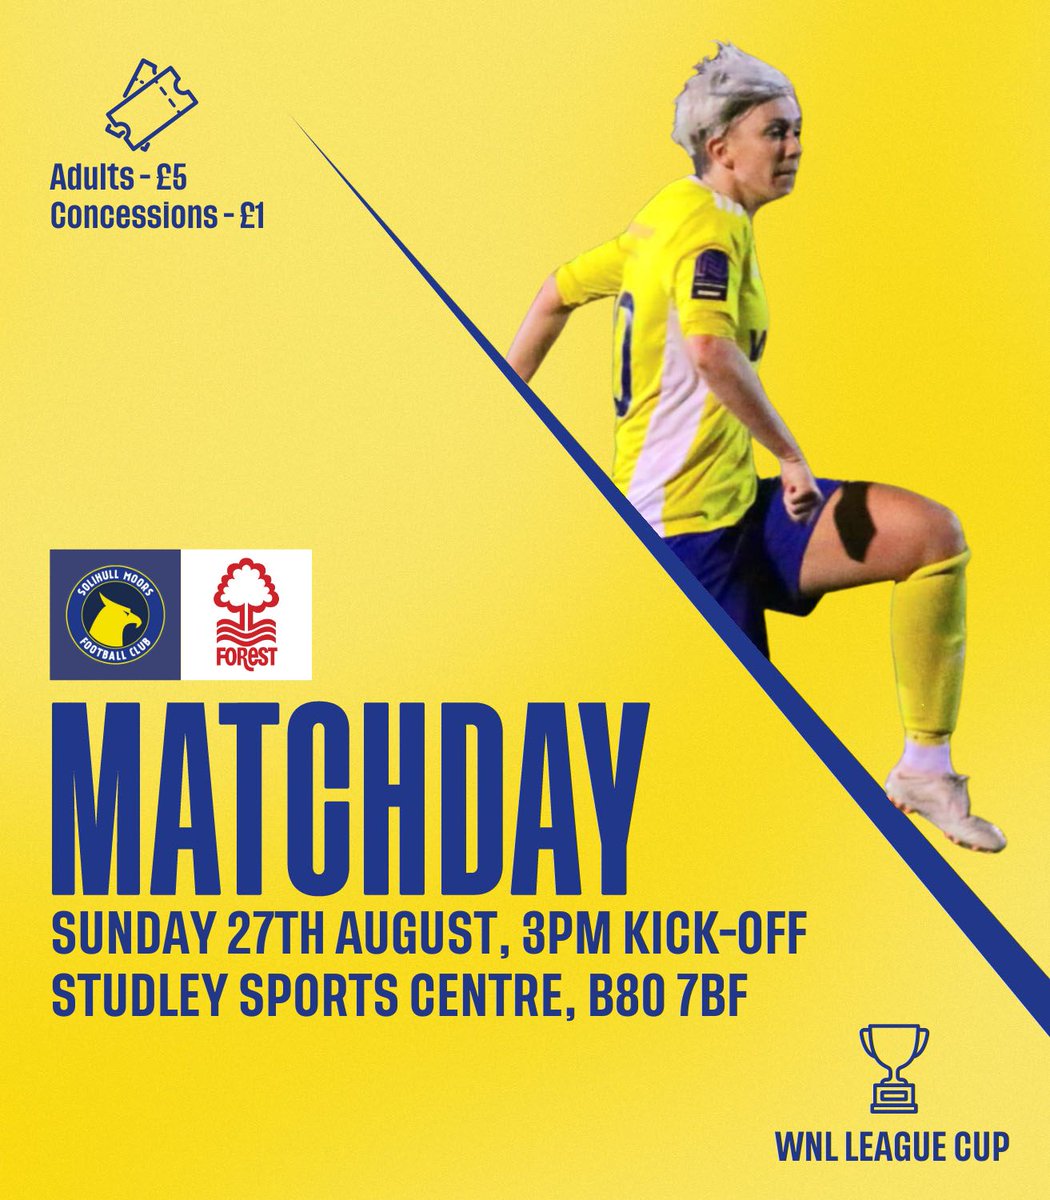 MATCHDAY | Today we take on @NFFCWomen in the #FAWNL League Cup. We're looking forward to welcoming as many of you as possible for our opening game of the season as we take on strong opposition from the league above!